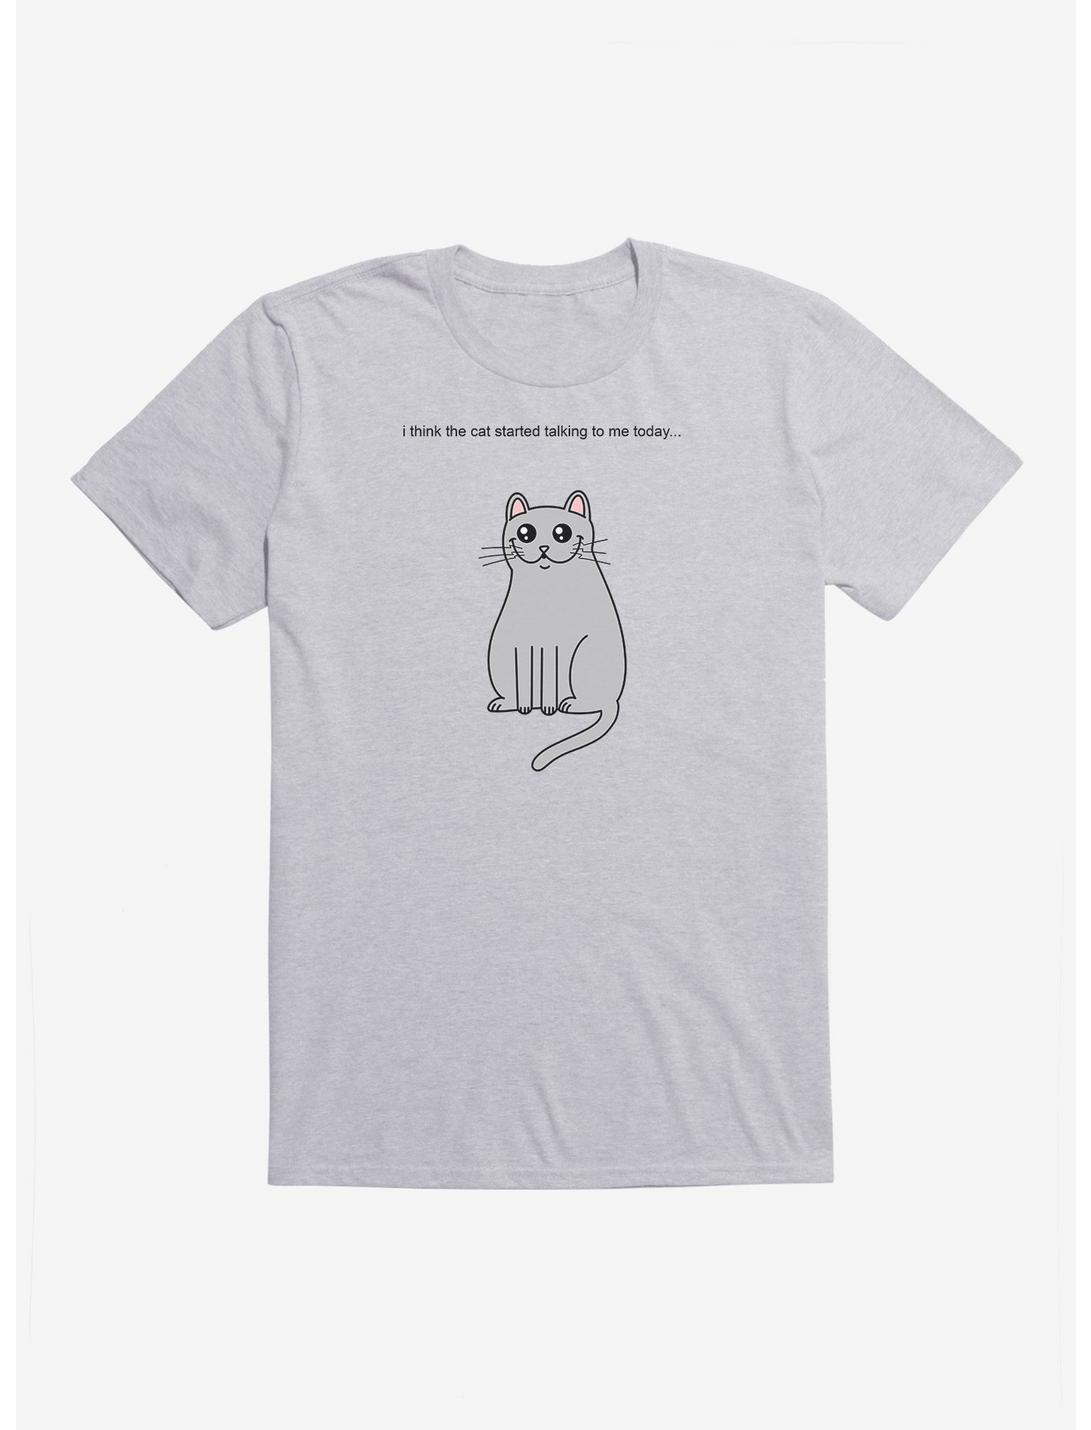 Cat Started Talking To Me Today T-Shirt, HEATHER GREY, hi-res